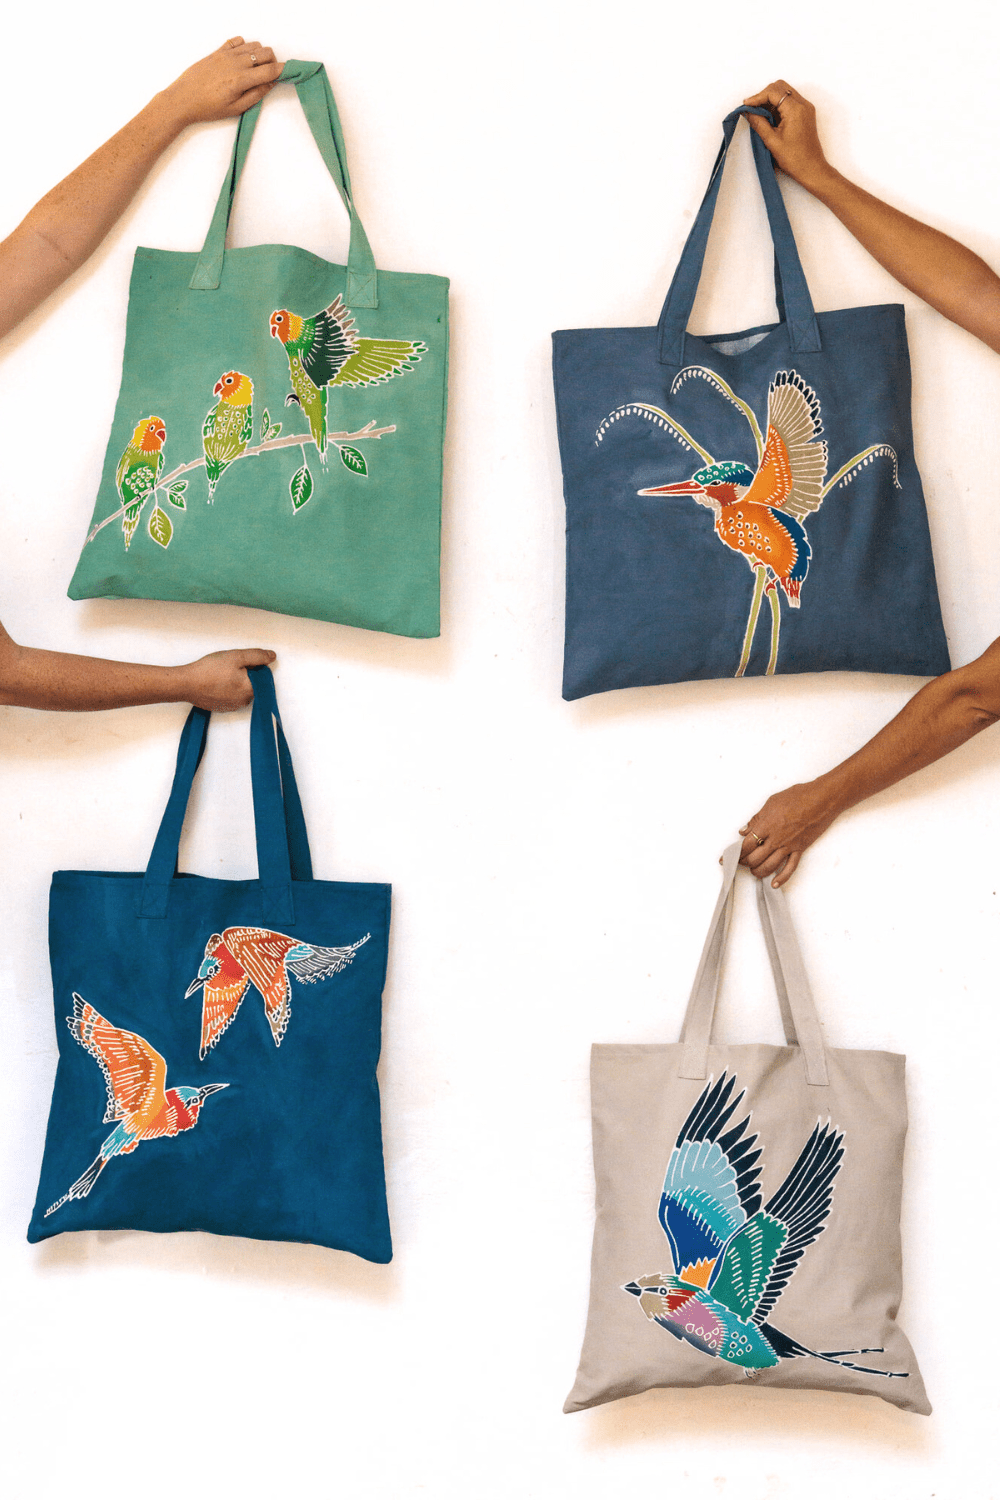 Papiko Malachite Kingfisher Tote Bag - Handmade by TRIBAL TEXTILES - Handcrafted Home Decor Interiors - African Made